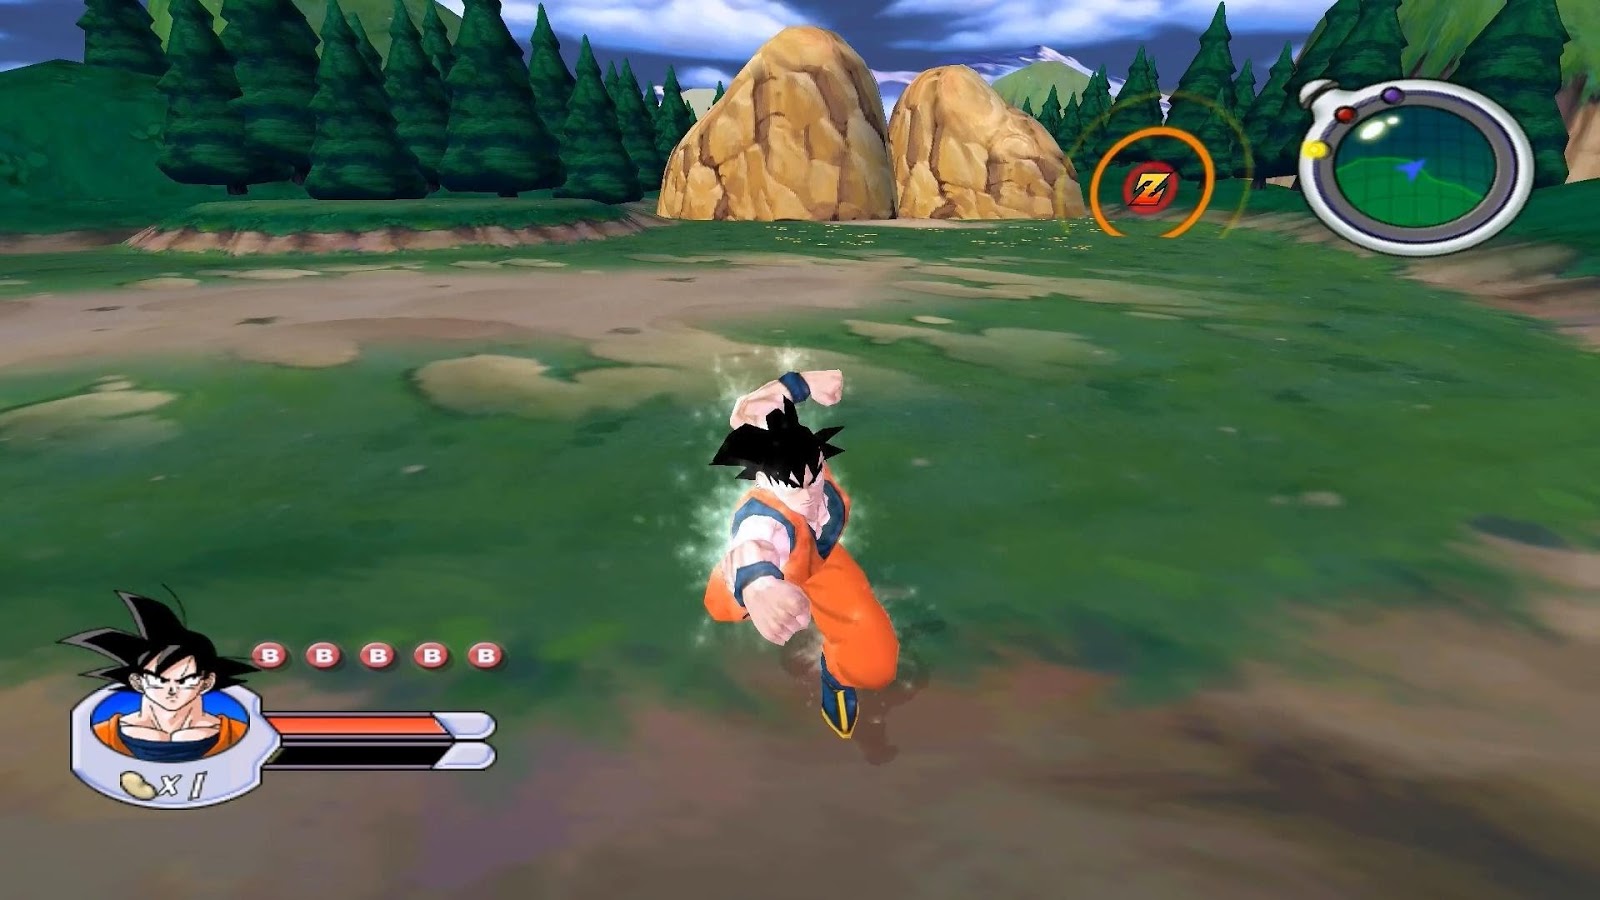 Download Game Pc Dragon Ball Z - clevermath